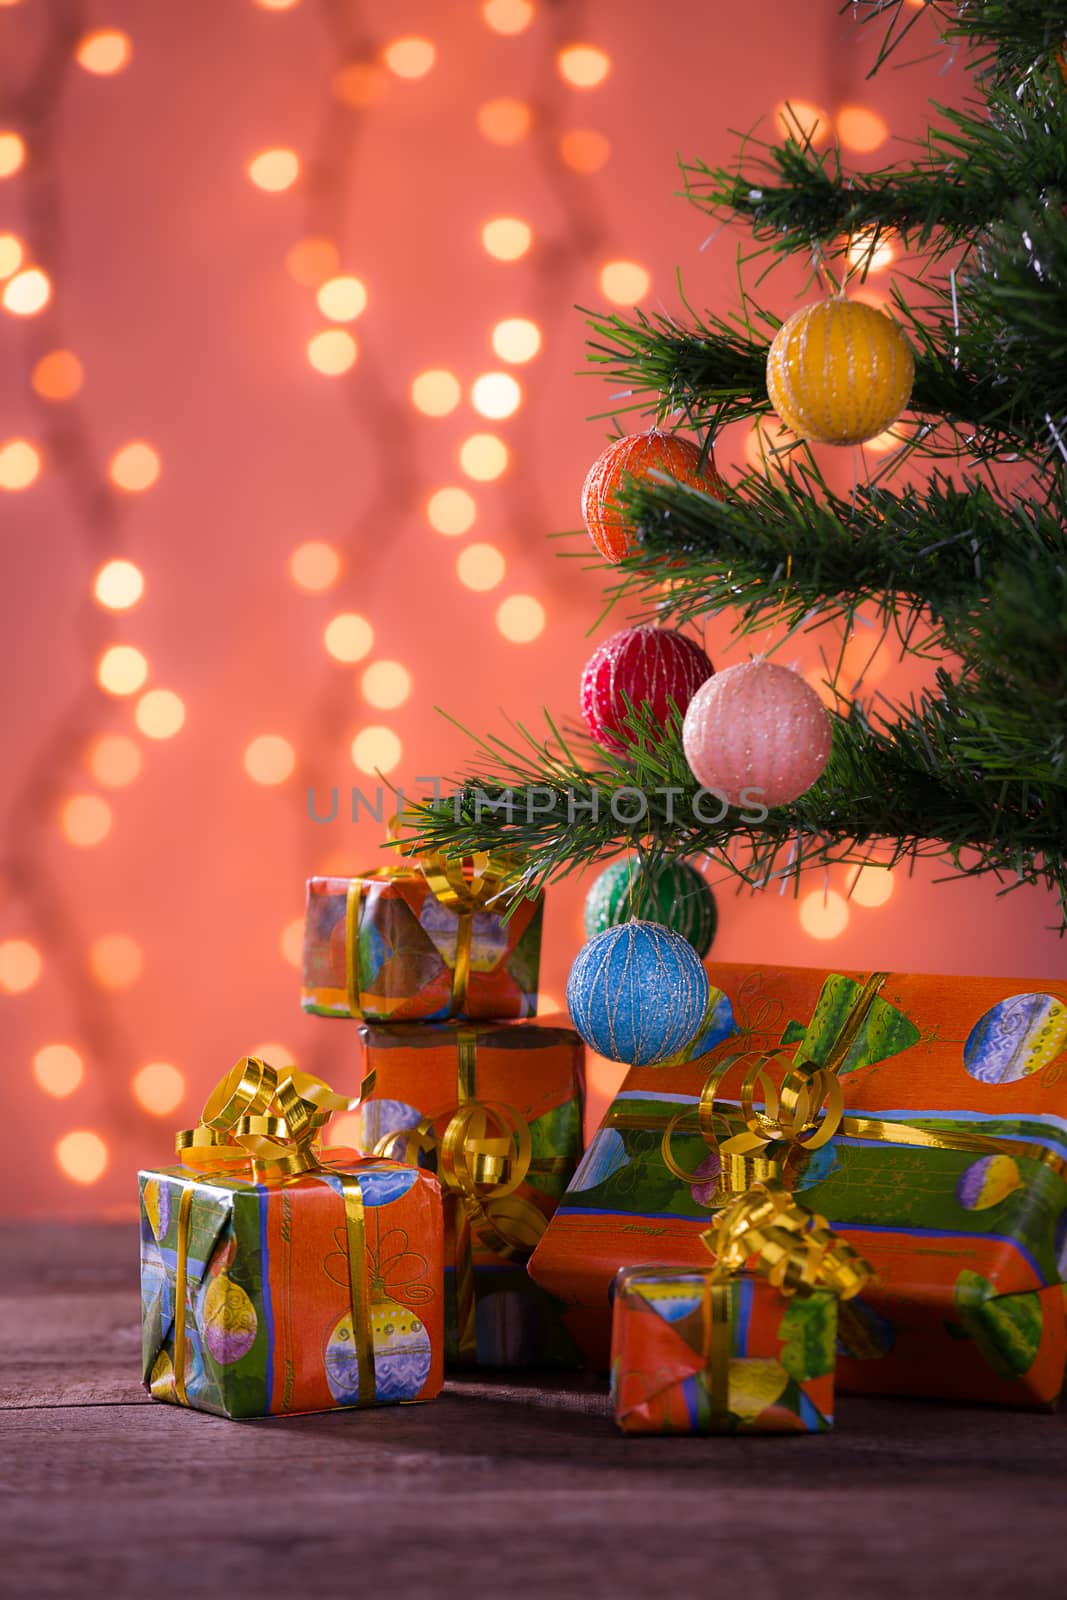 Christmas gifts with blurred lights on background over the planks under the tree